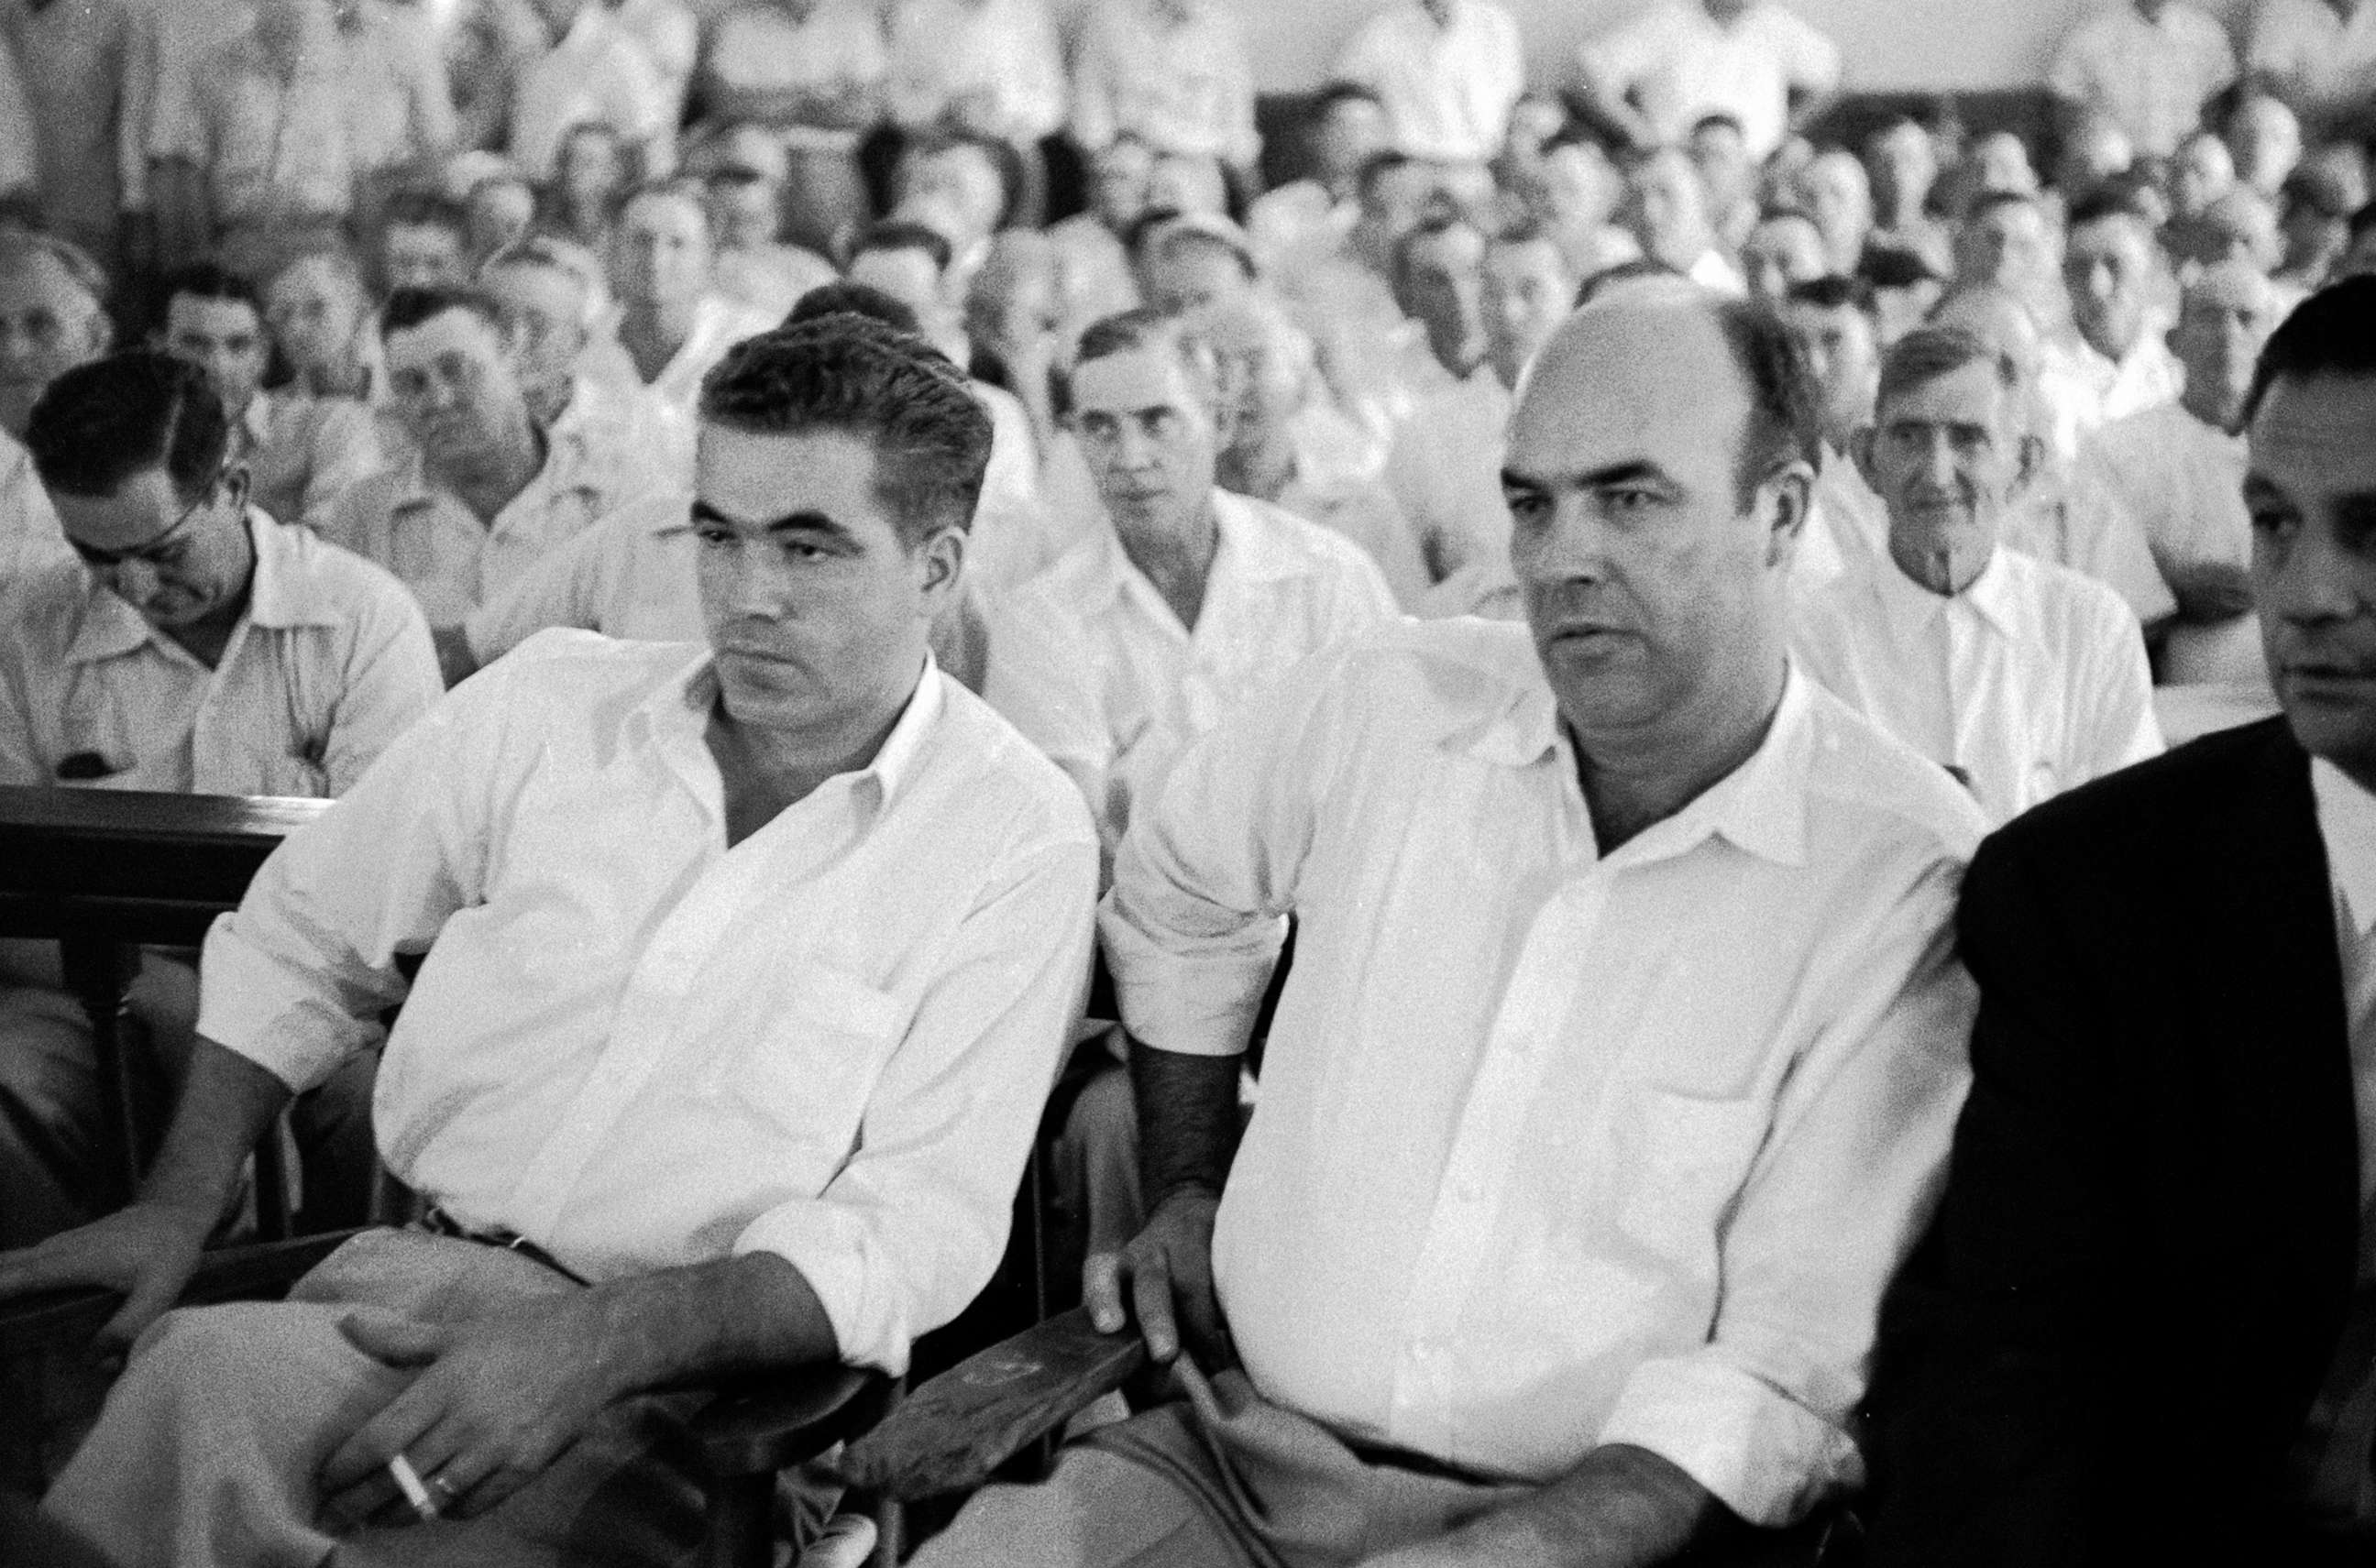 PHOTO: Pictured (L-R), defendants Roy Bryant (1931 - 1994) and J. W. Milam (1919 - 1981) listen to testimony during their murder trial in the packed Tallahatchie County Courthouse in Sumner, Miss., Sept. 1955.